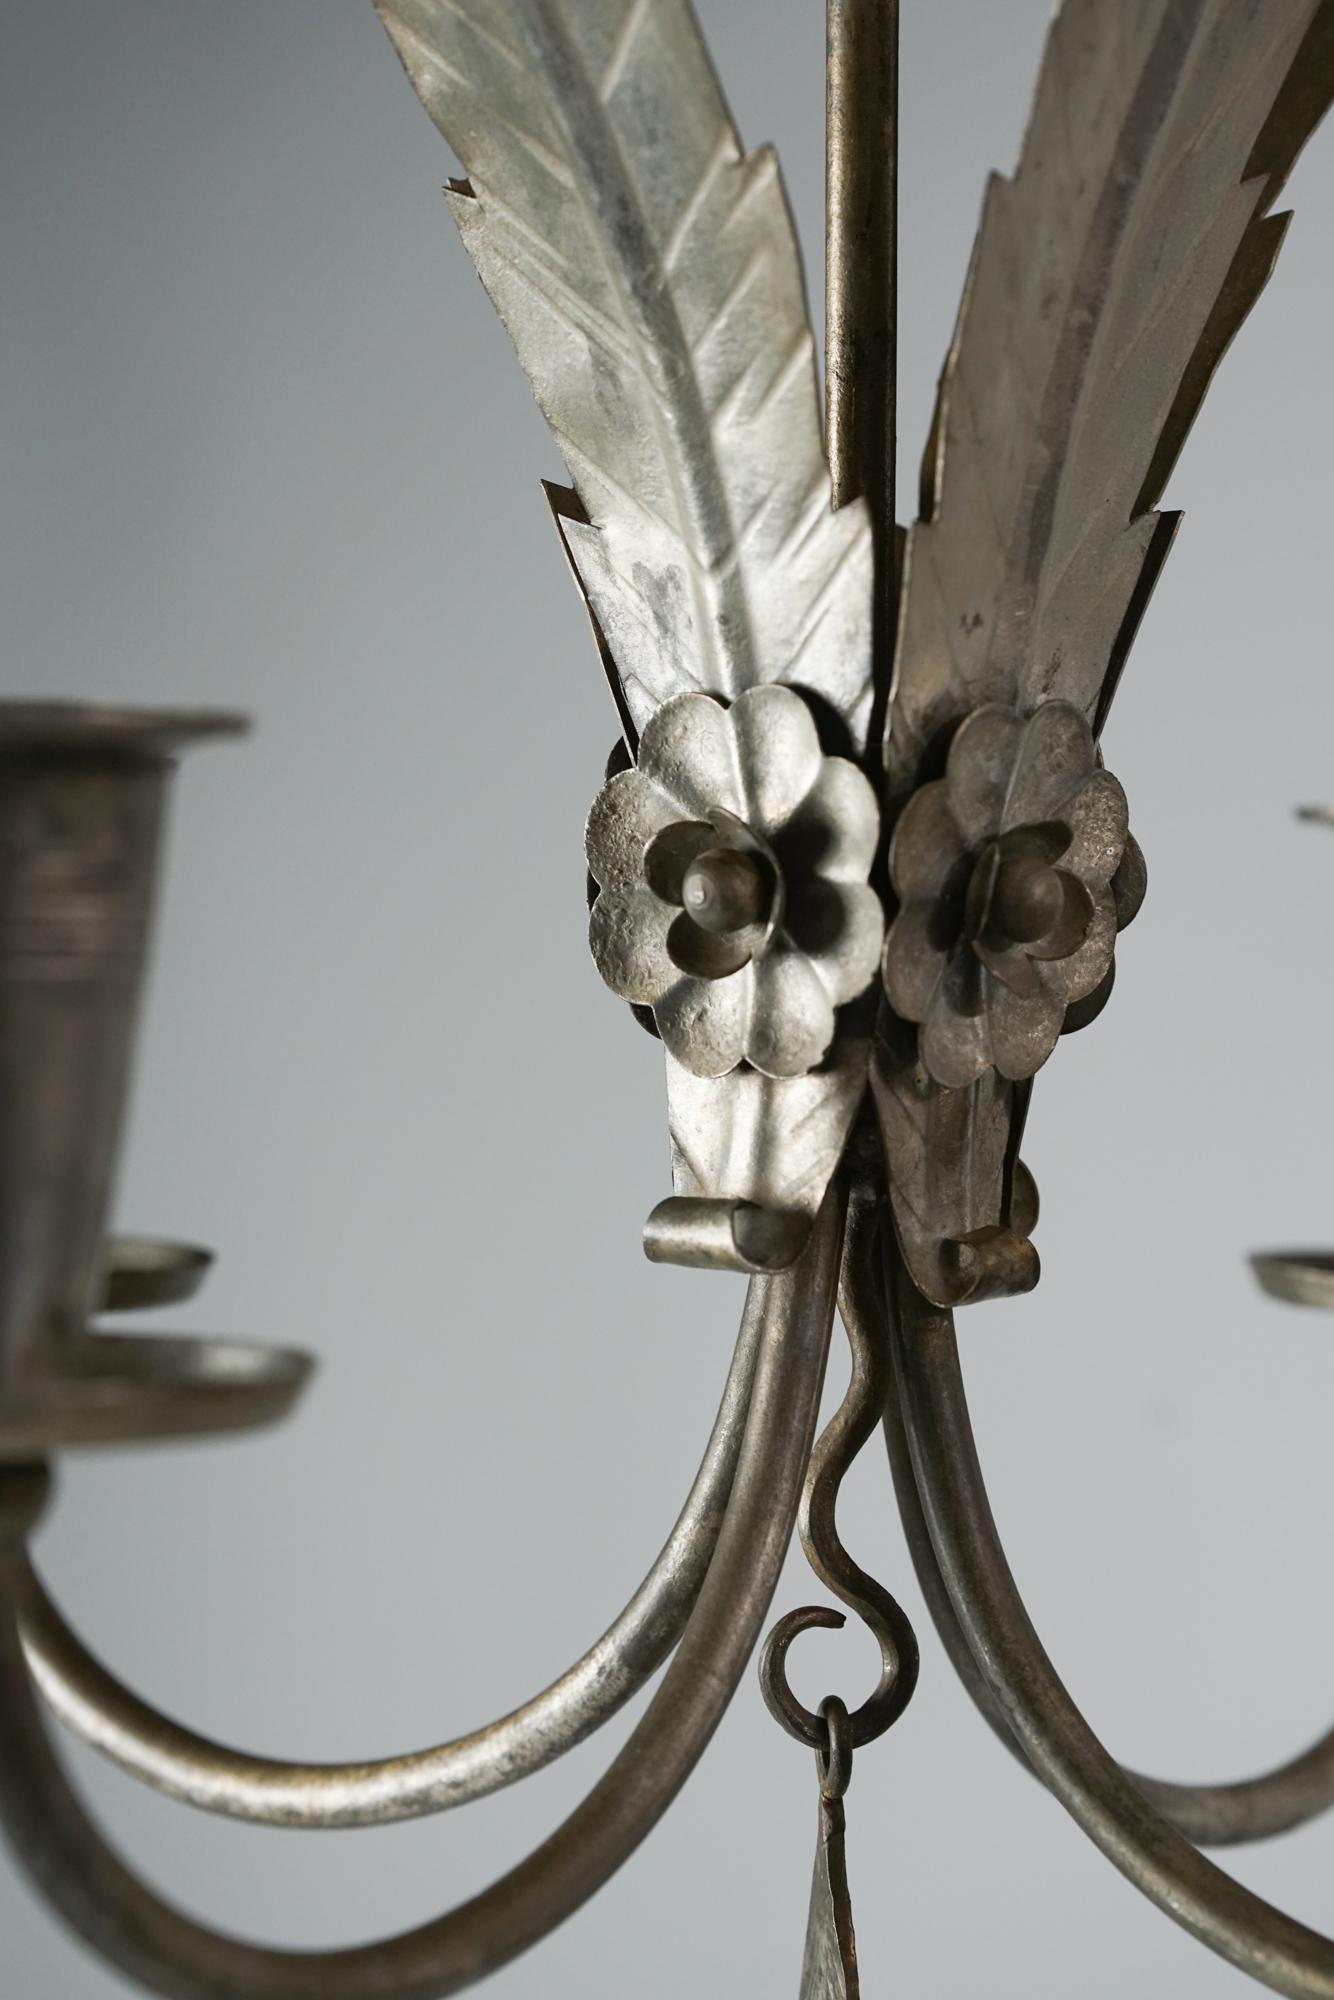 Pair of model R3/1703 chandeliers by Paavo Tynell for Taito Oy from the 1930s. Tinplated forged iron. Beautiful leaf and flower details. The chandeliers are sold as a set. Good vintage condition, patina consistent with age and use.